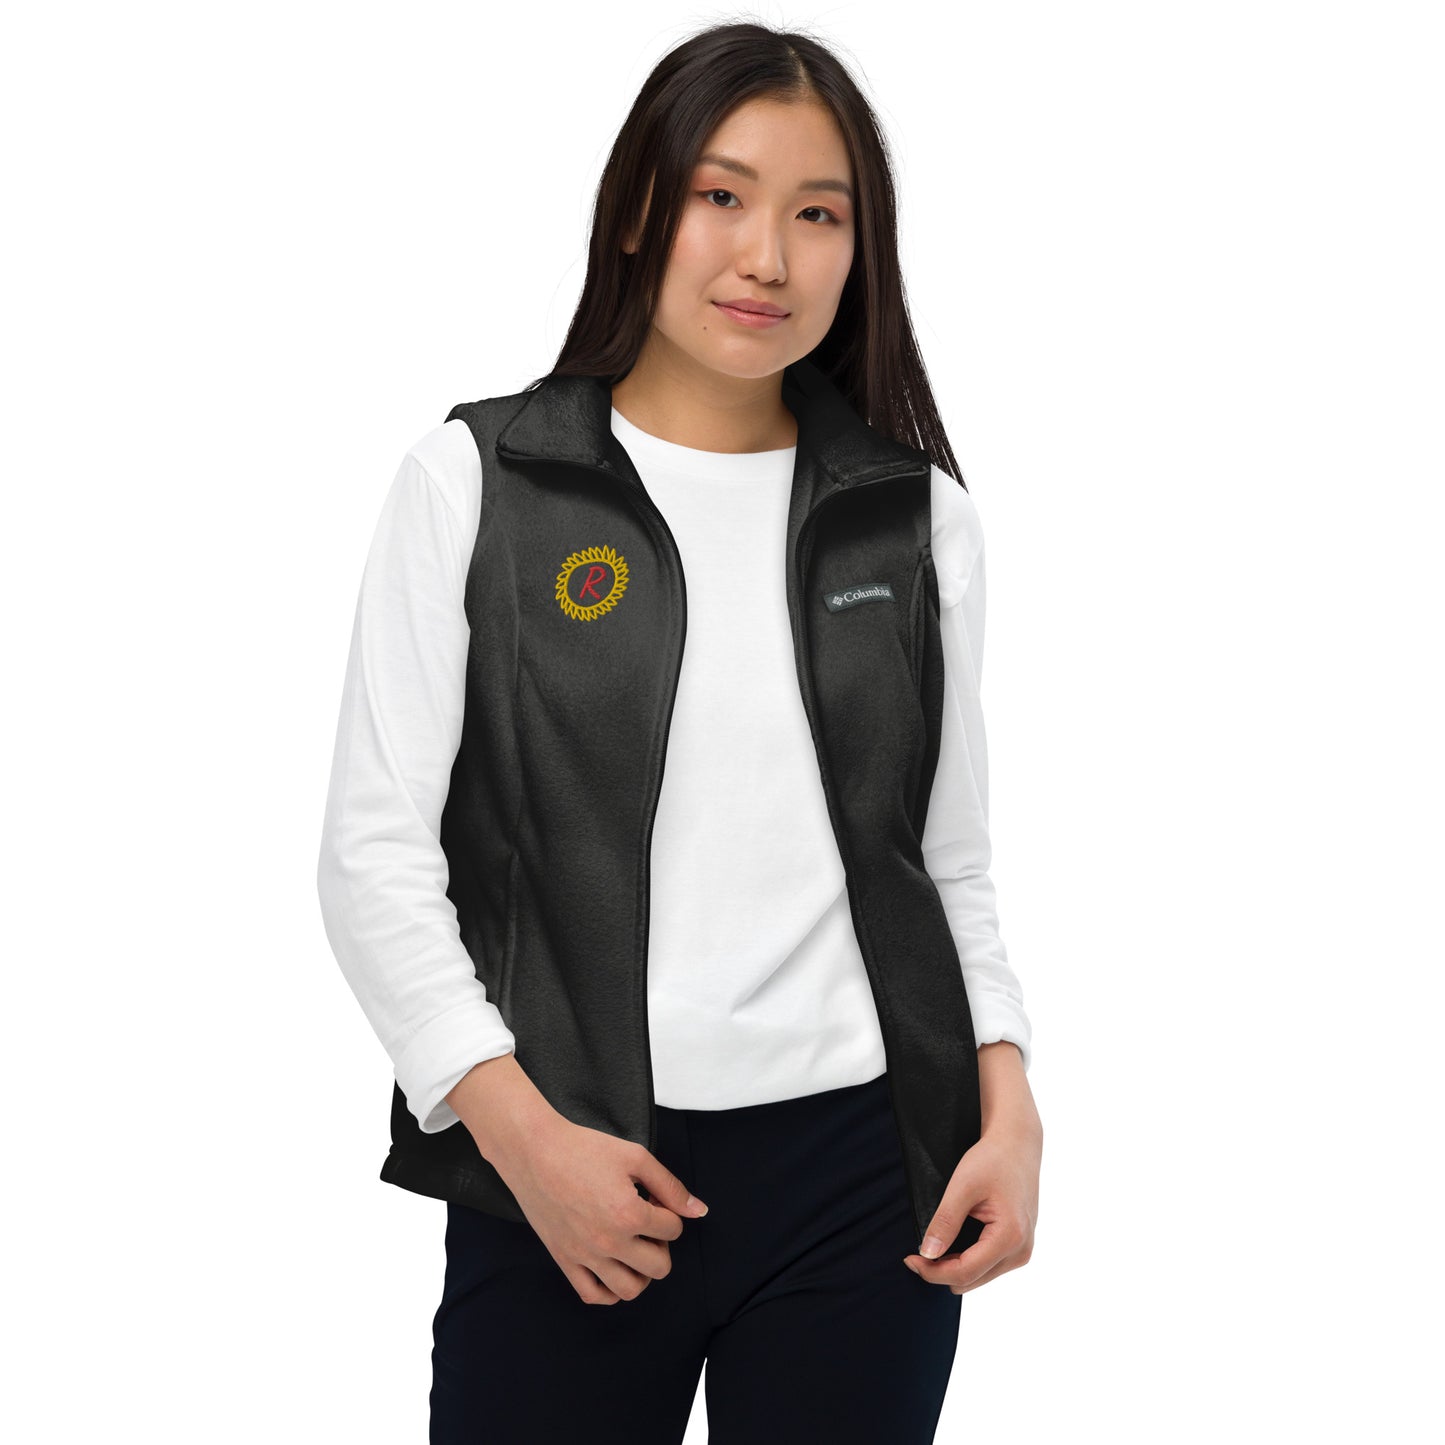 Women’s Columbia fleece vest, gold/red thread embroidery "R" in a custom circle